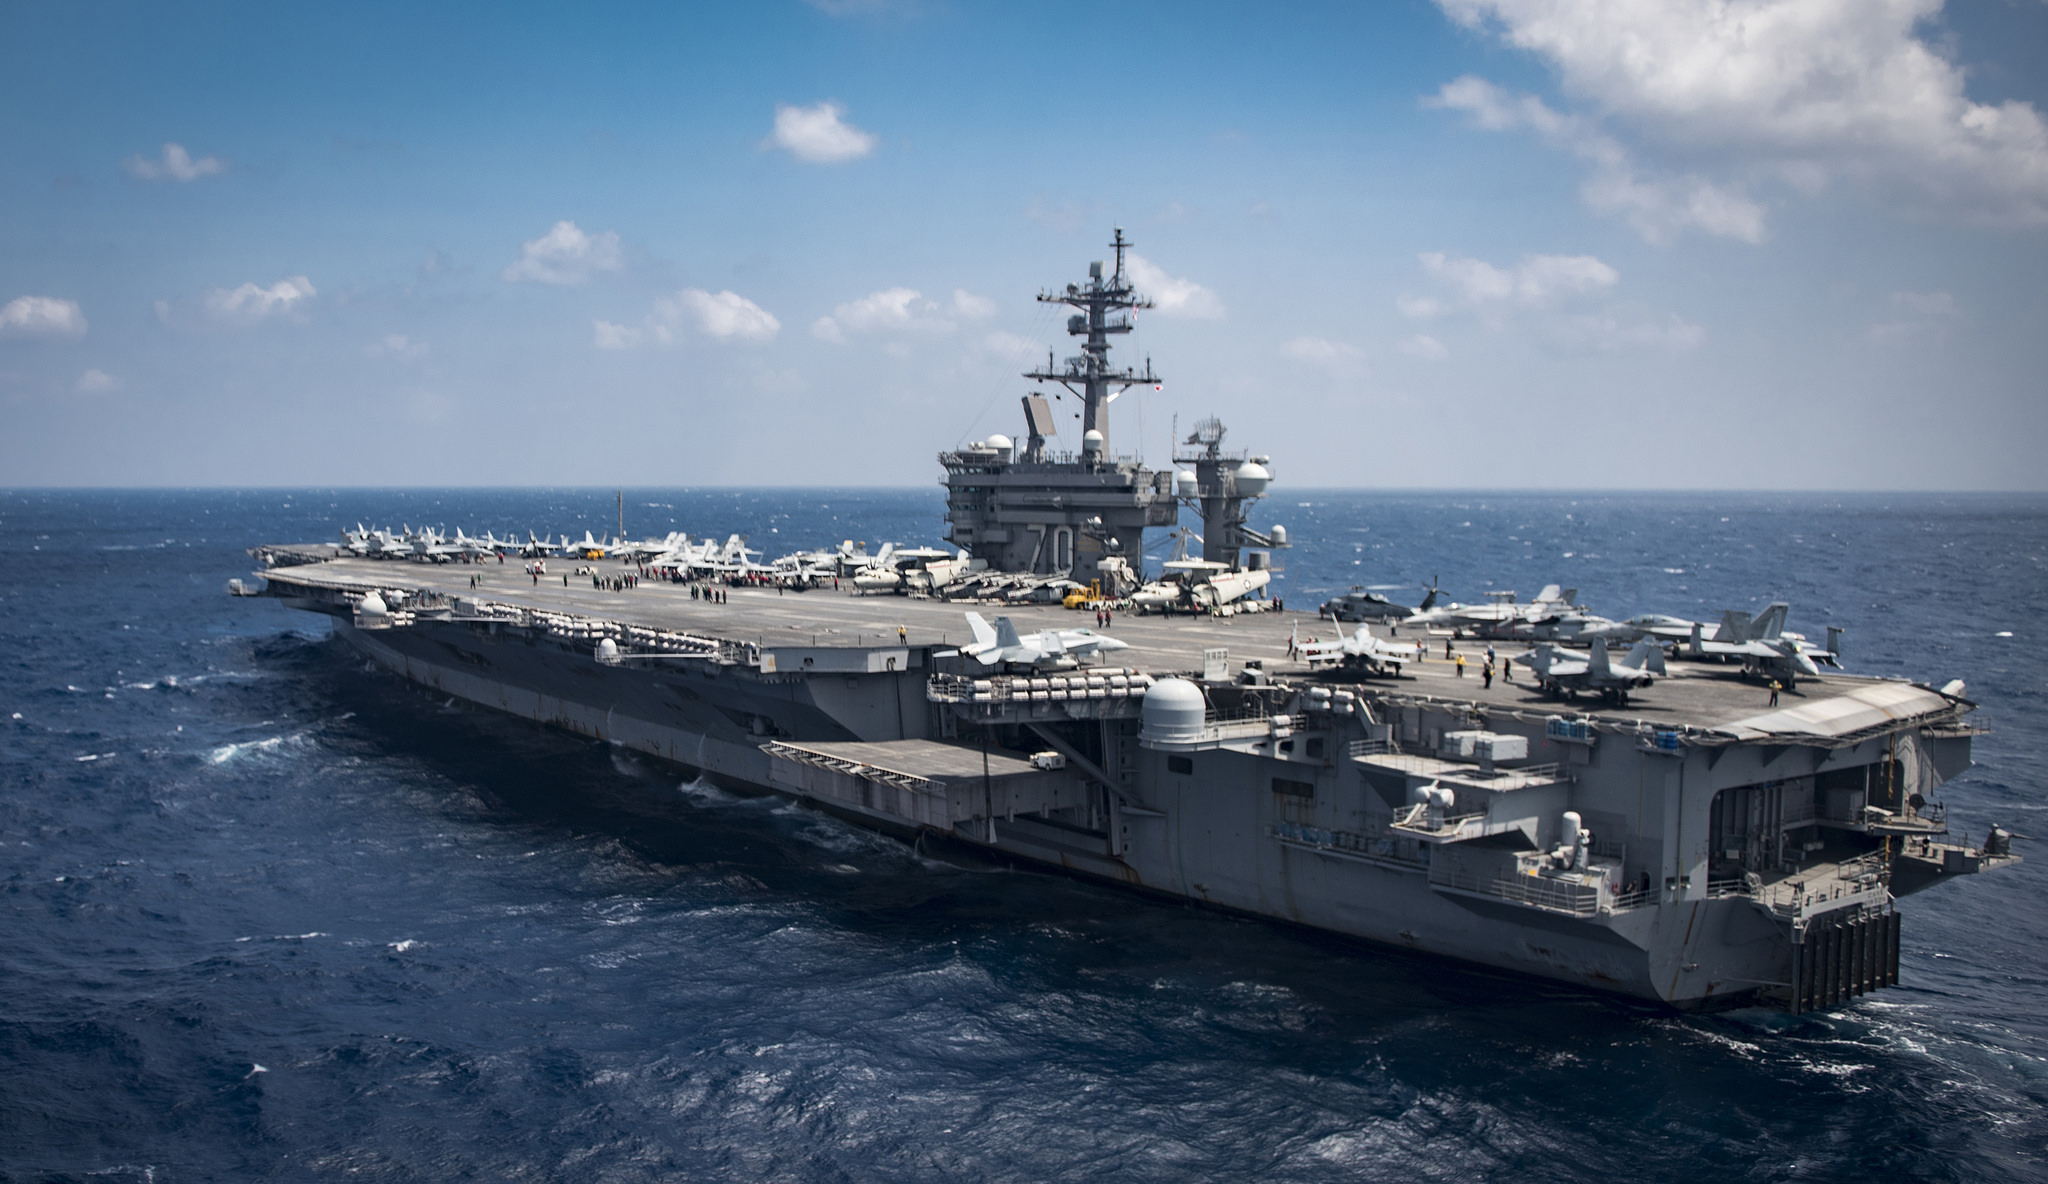 The aircraft carrier USS Carl Vinson transits the South China Sea. The ship and its carrier strike group are on a western Pacific deployment as part of the U.S. Pacific Fleet-led initiative to extend the command and control functions of U.S. 3rd Fleet.